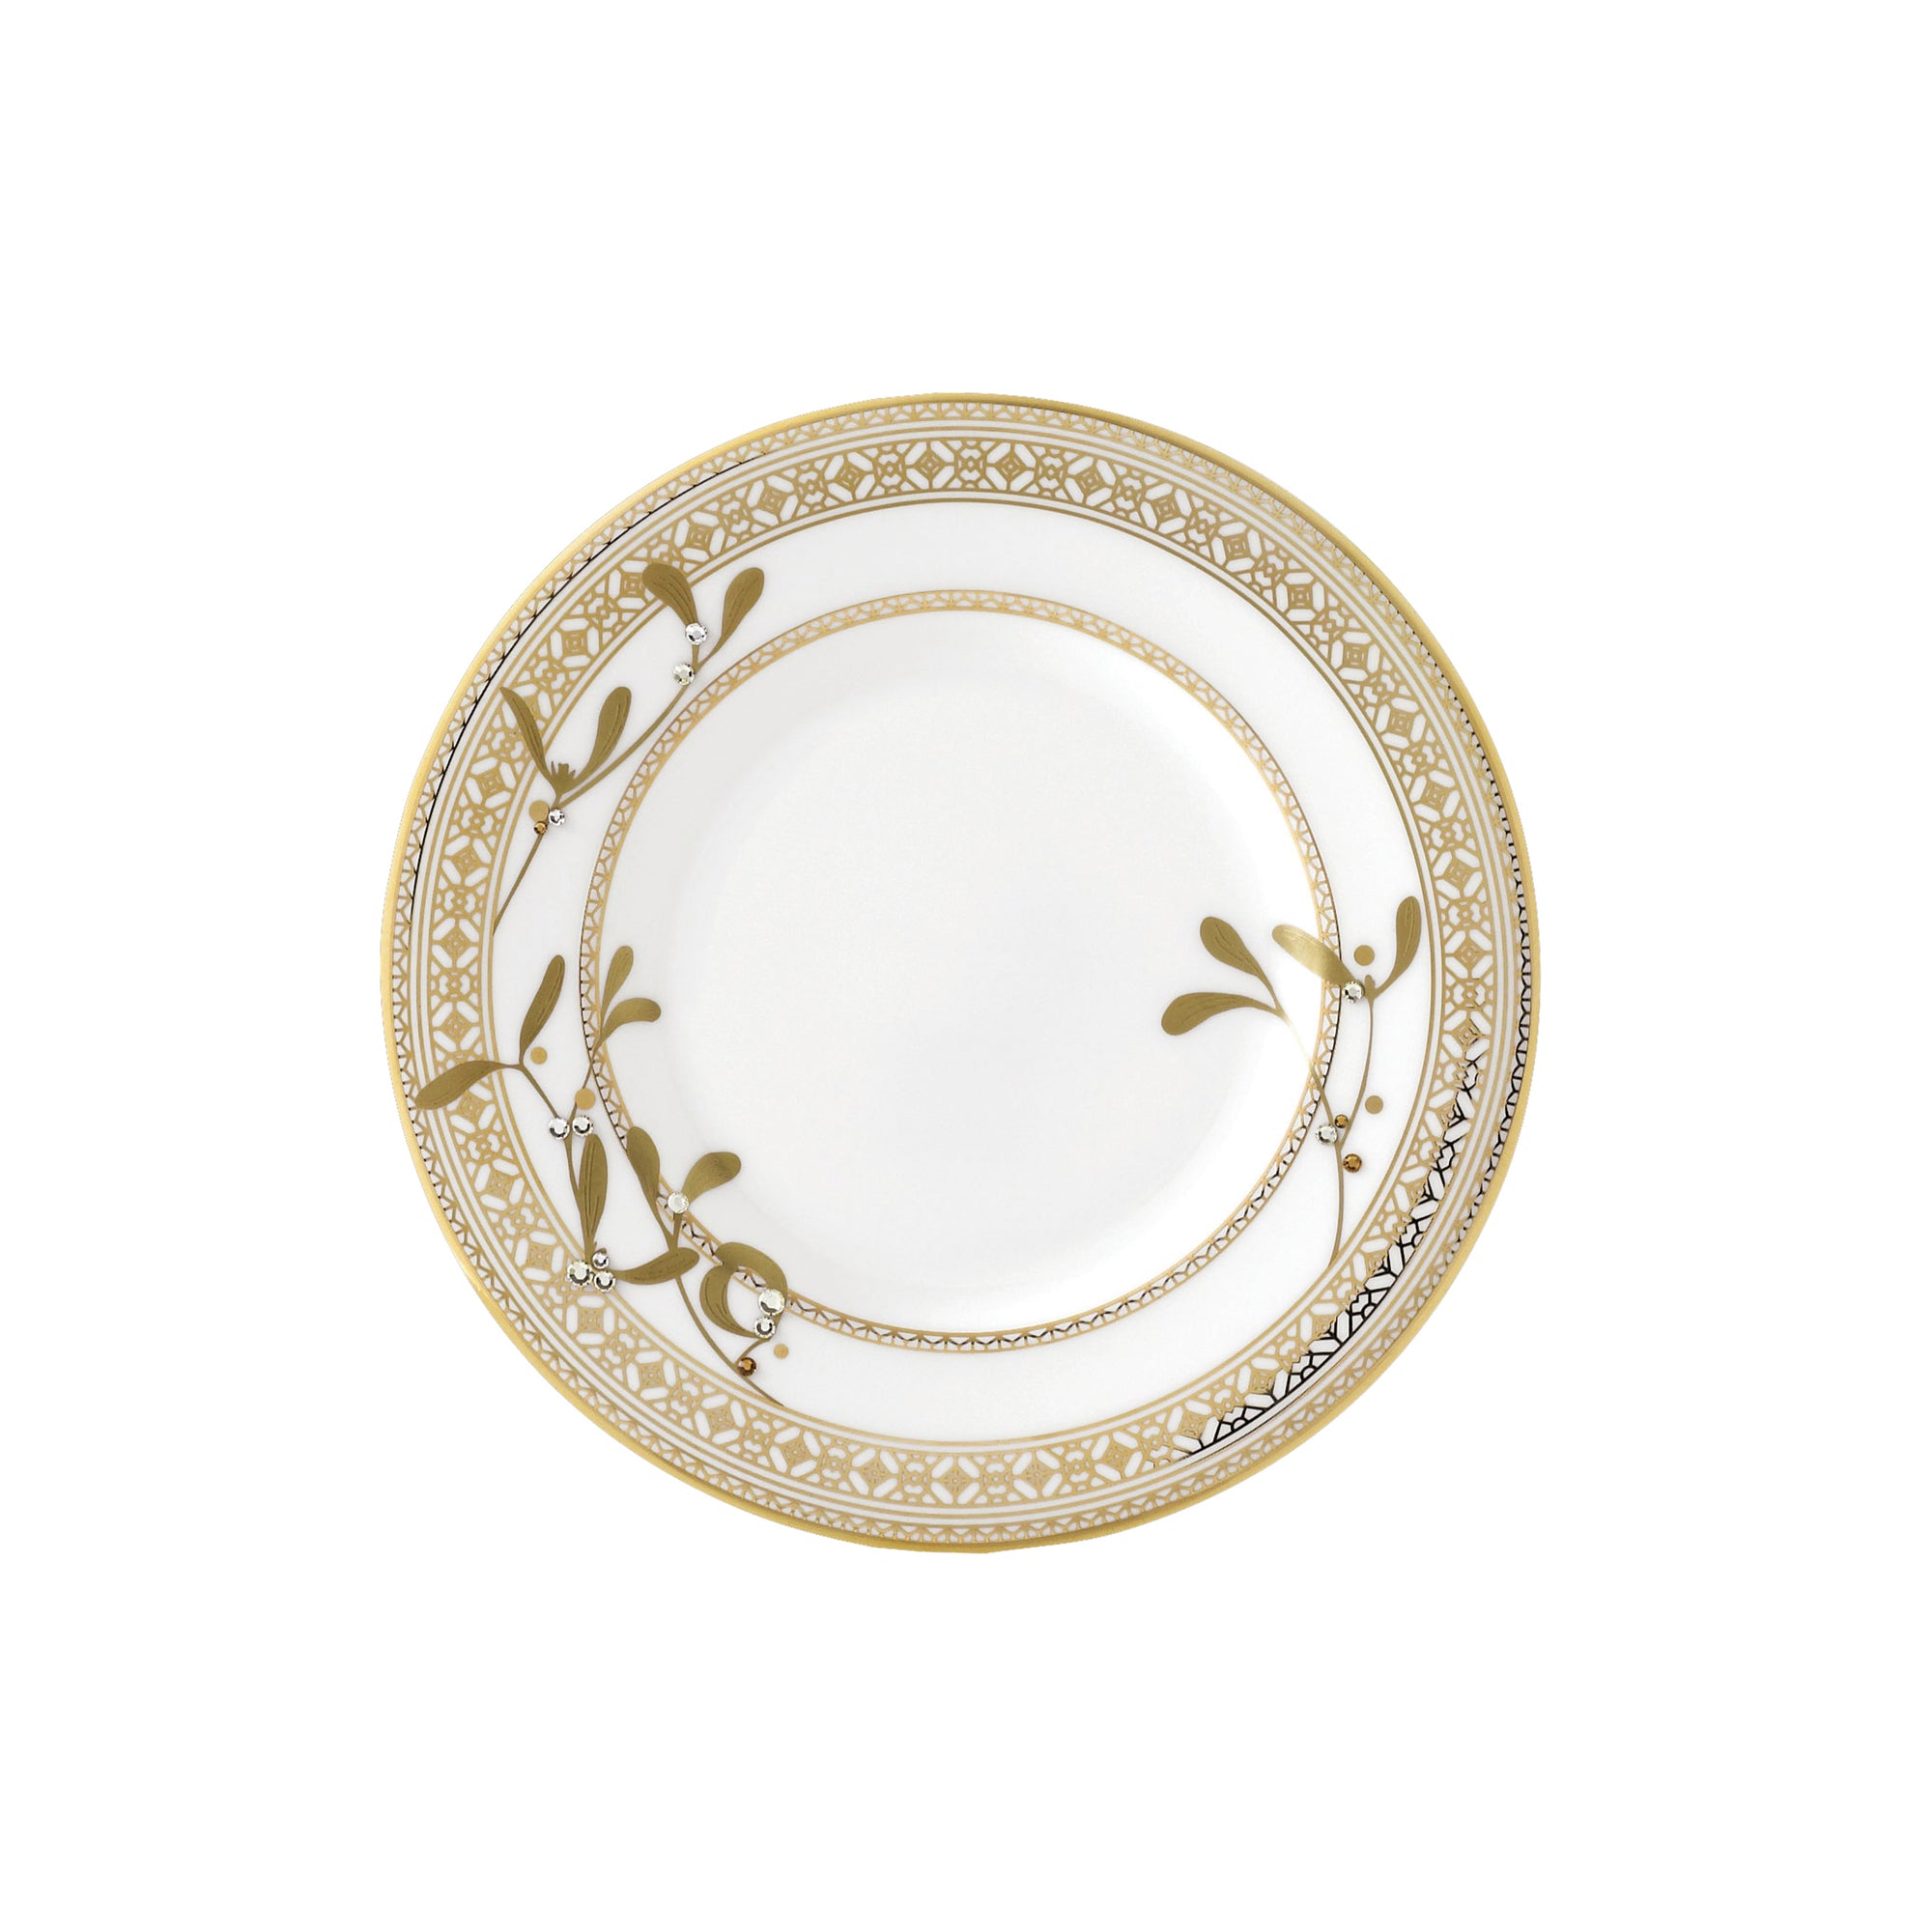 Prouna Golden Leaves Bread & Butter Plate White Background Photo